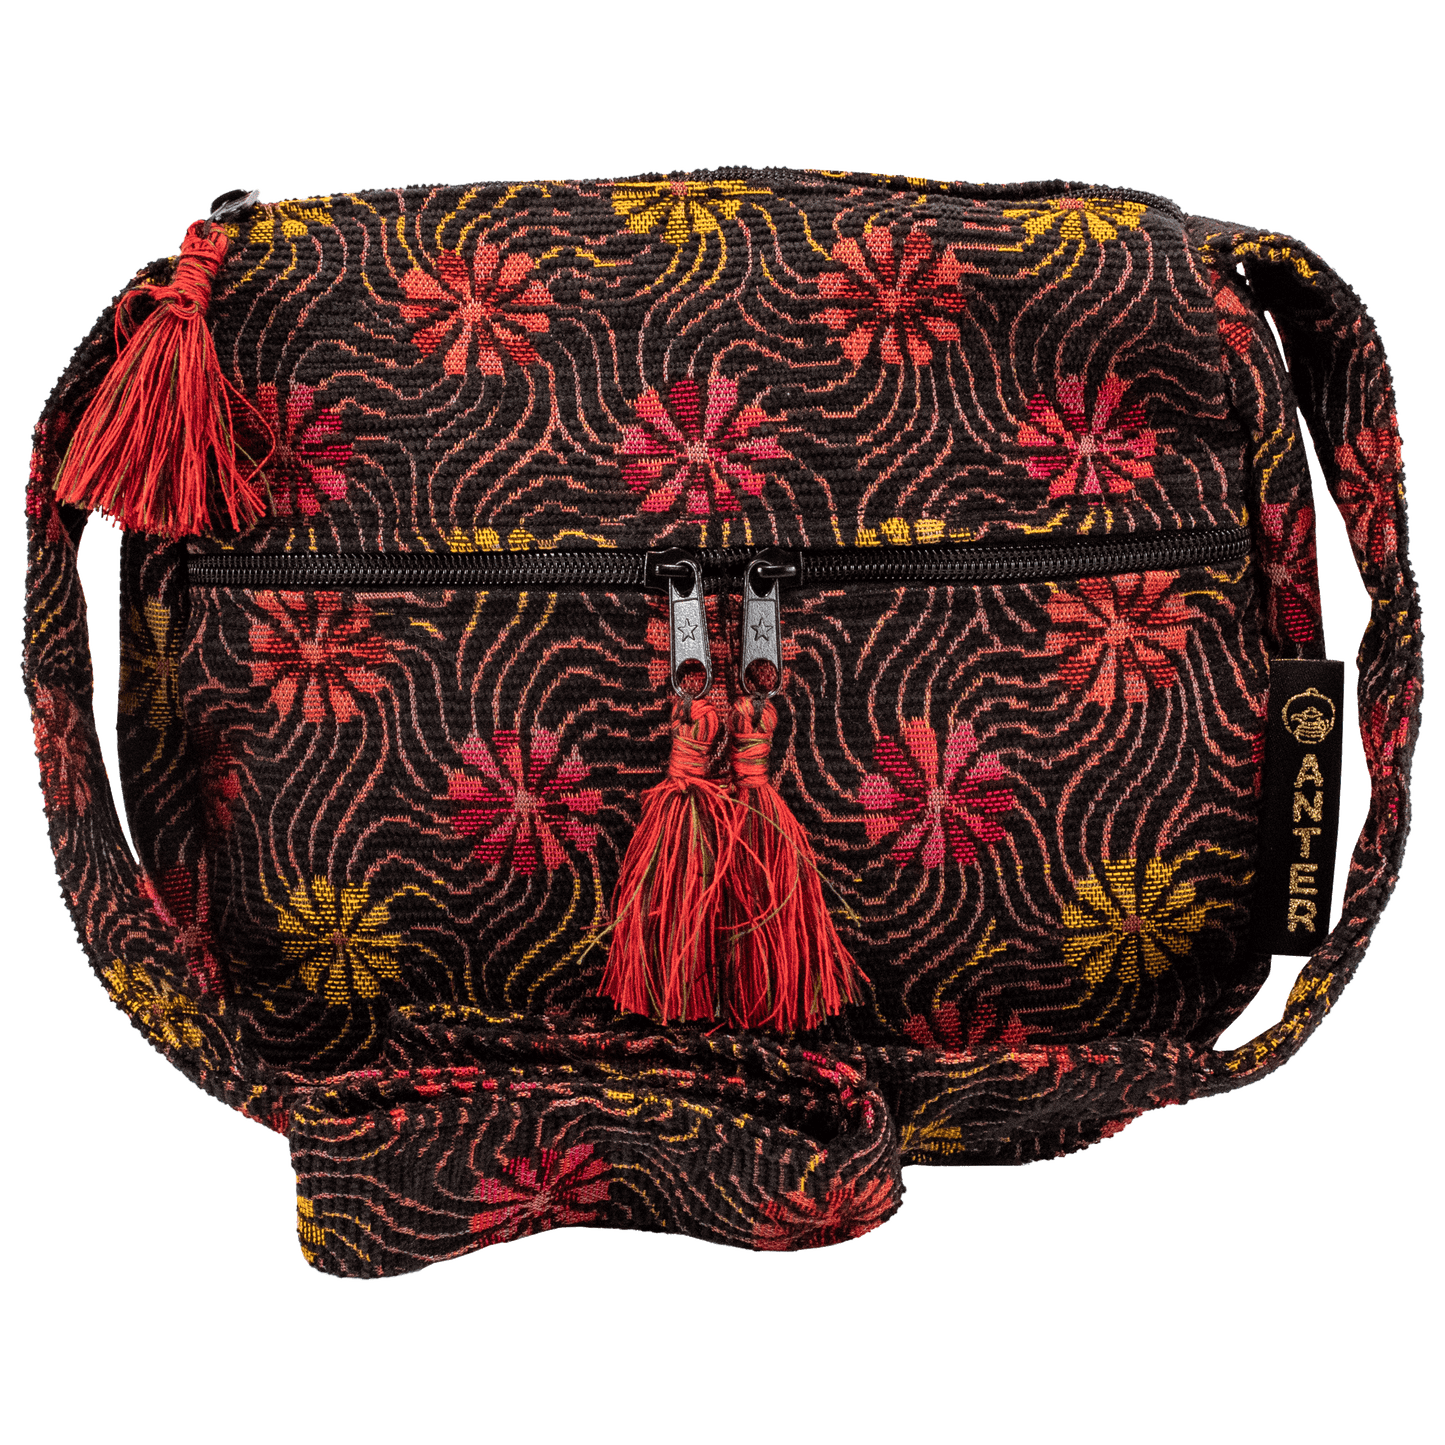 Black medium crossbody or shoulder bag with Red, yellow, and orange whimsical daisy pattern and tassels